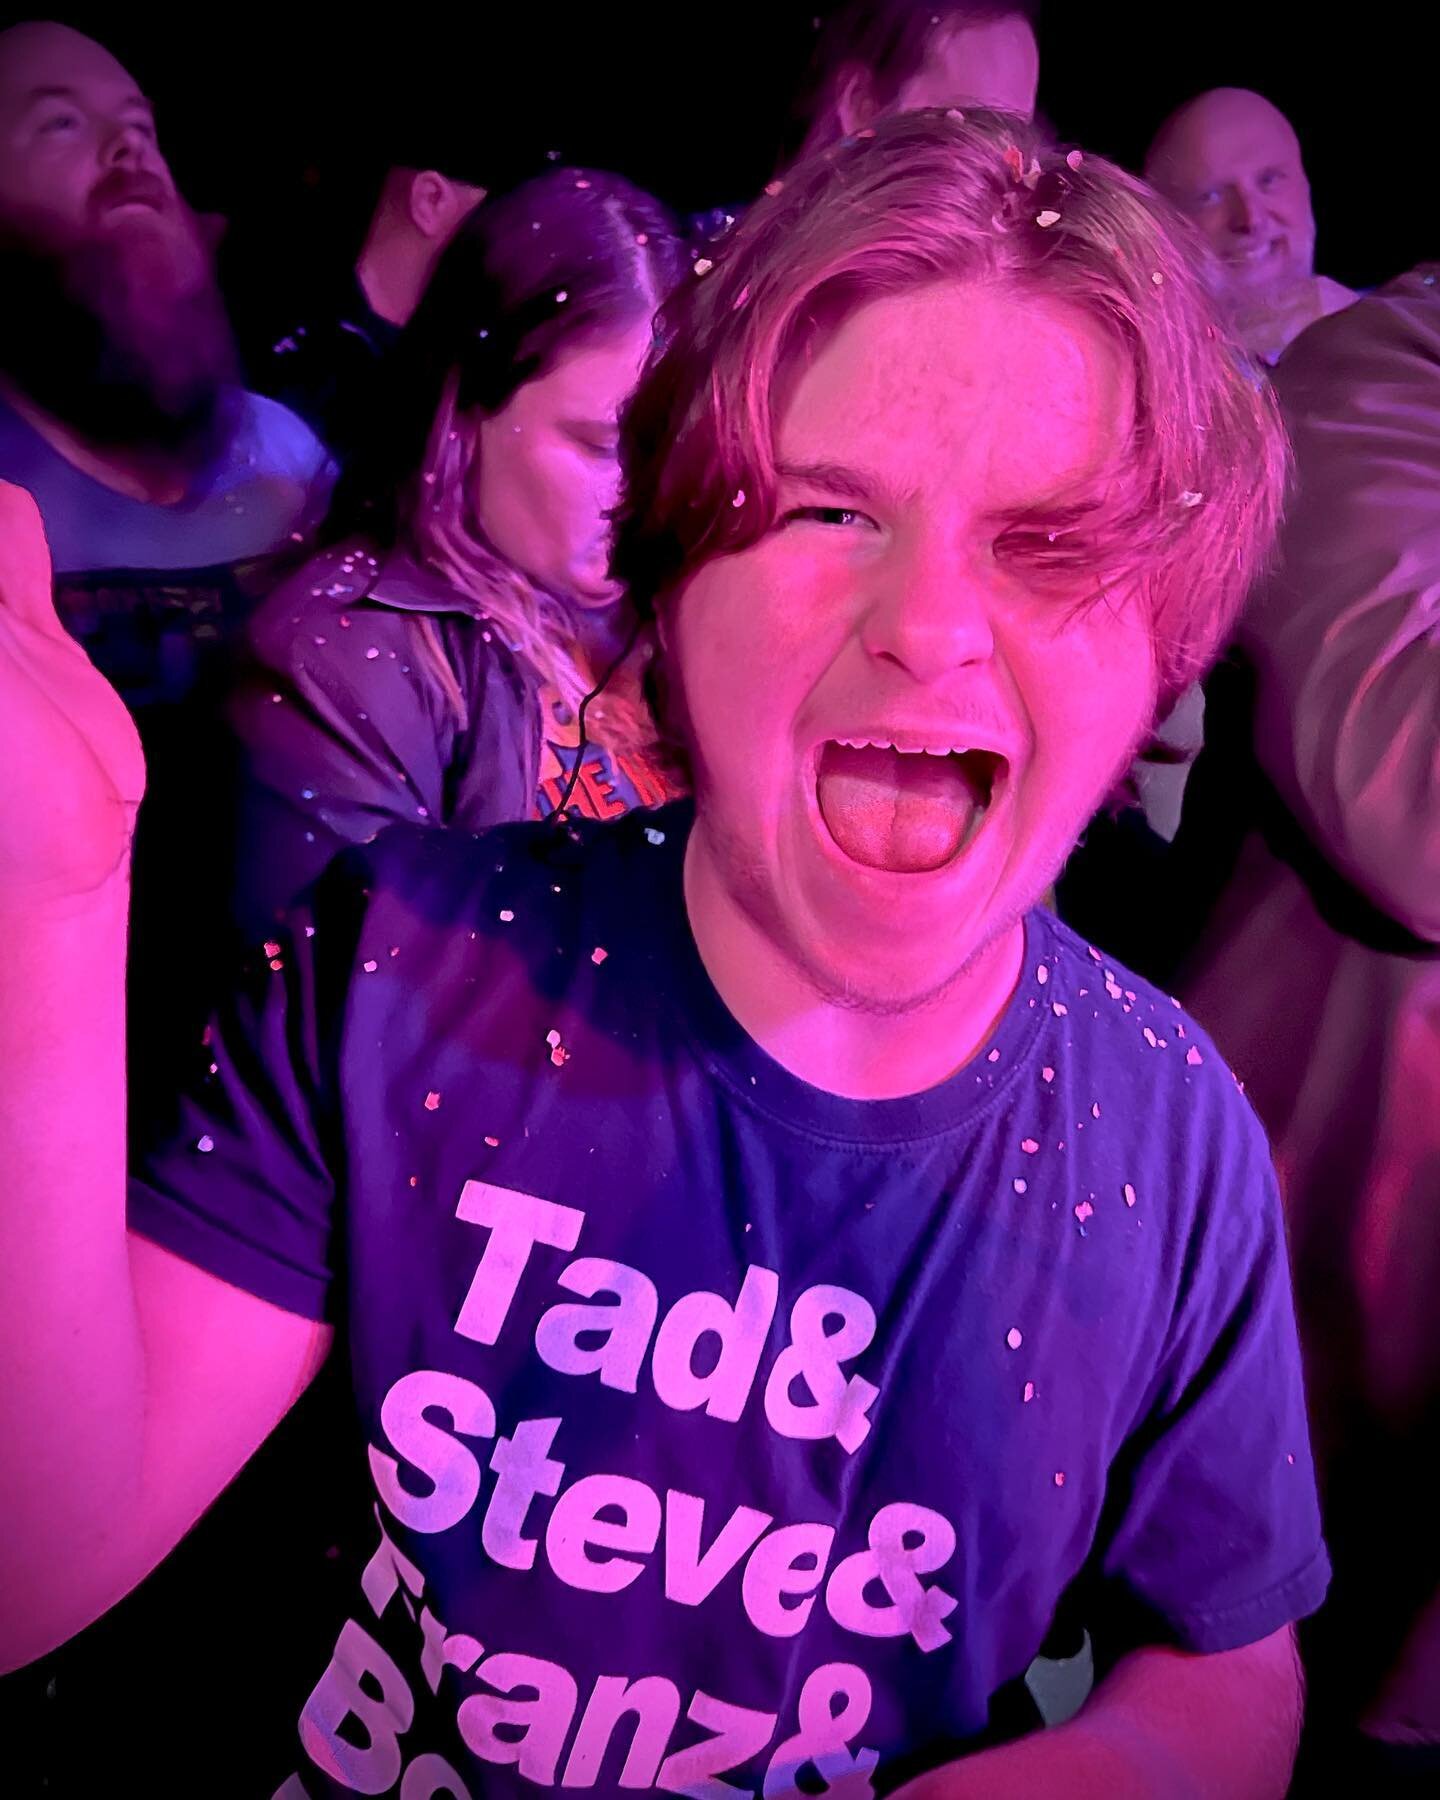 This. This is an almost 15 year old kid who had the time of his life seeing @theholdsteady twice in Minneapolis for a birthday surprise from mommy and me. We had a little fun too. We love you @levoneps